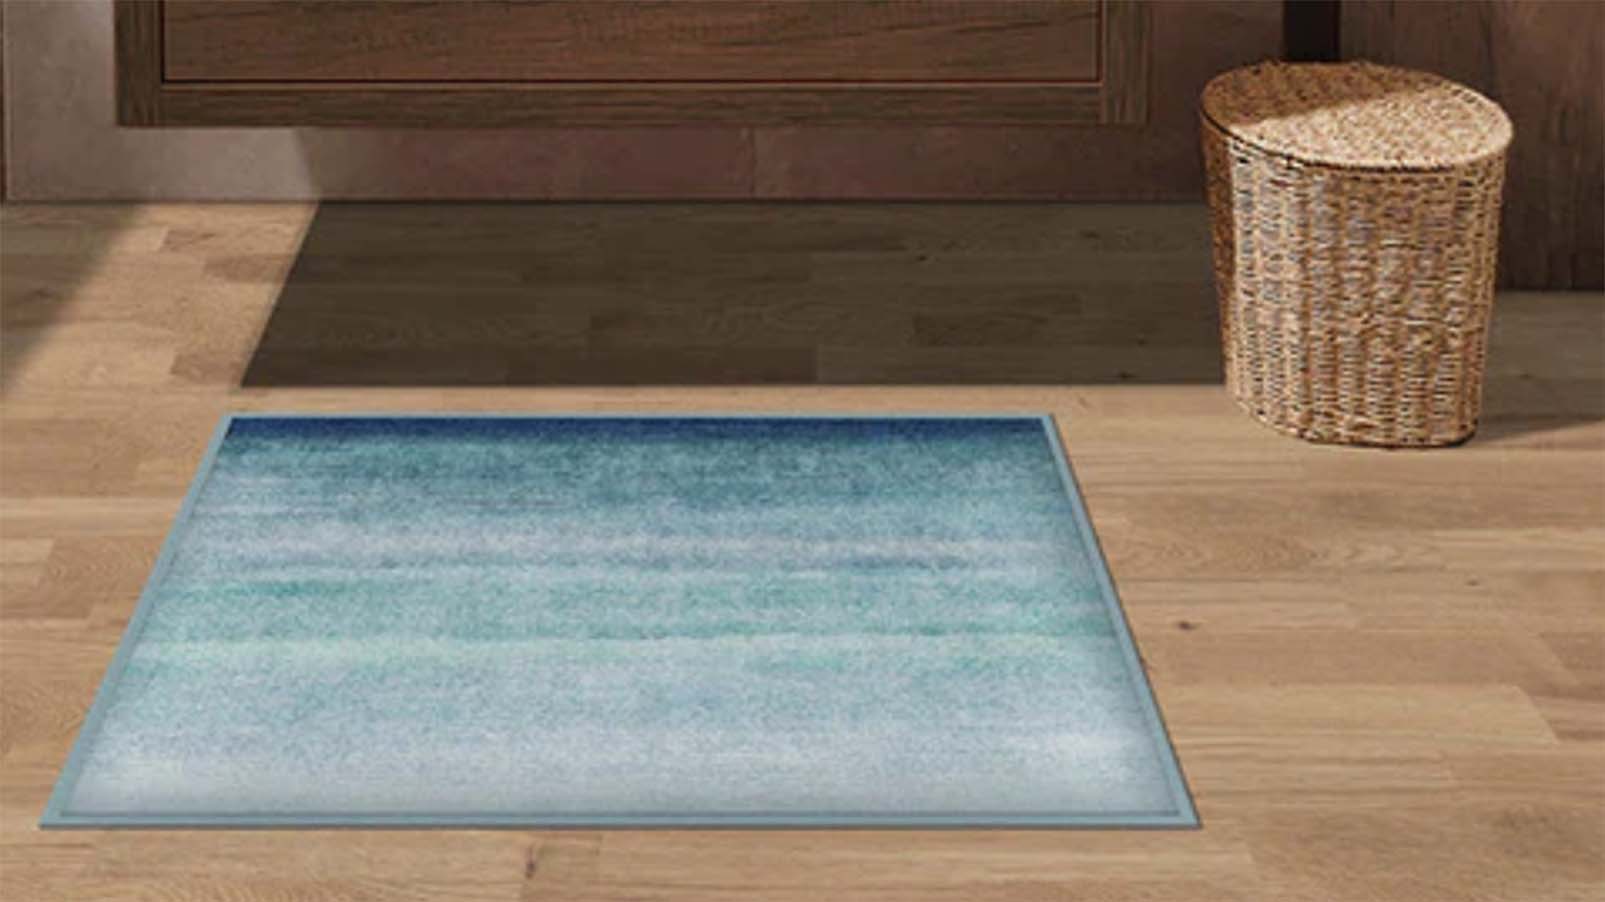 Ruggable bath mats are now available to shop | CNN Underscored